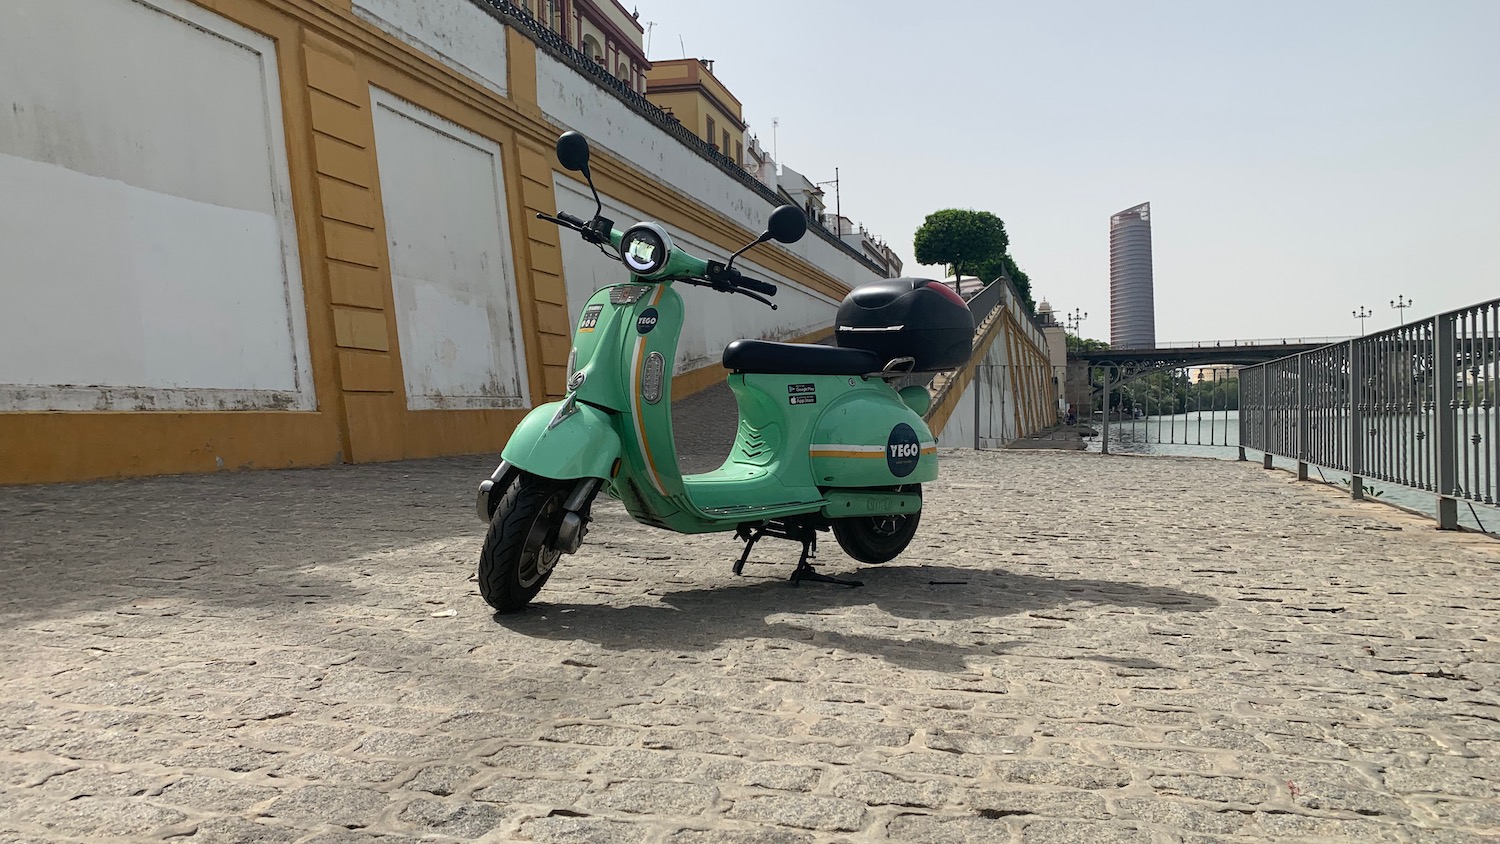 Picture of a retro, app-based electric rental scooter offered by the European YEGO company, with a stone wall visible in the background.